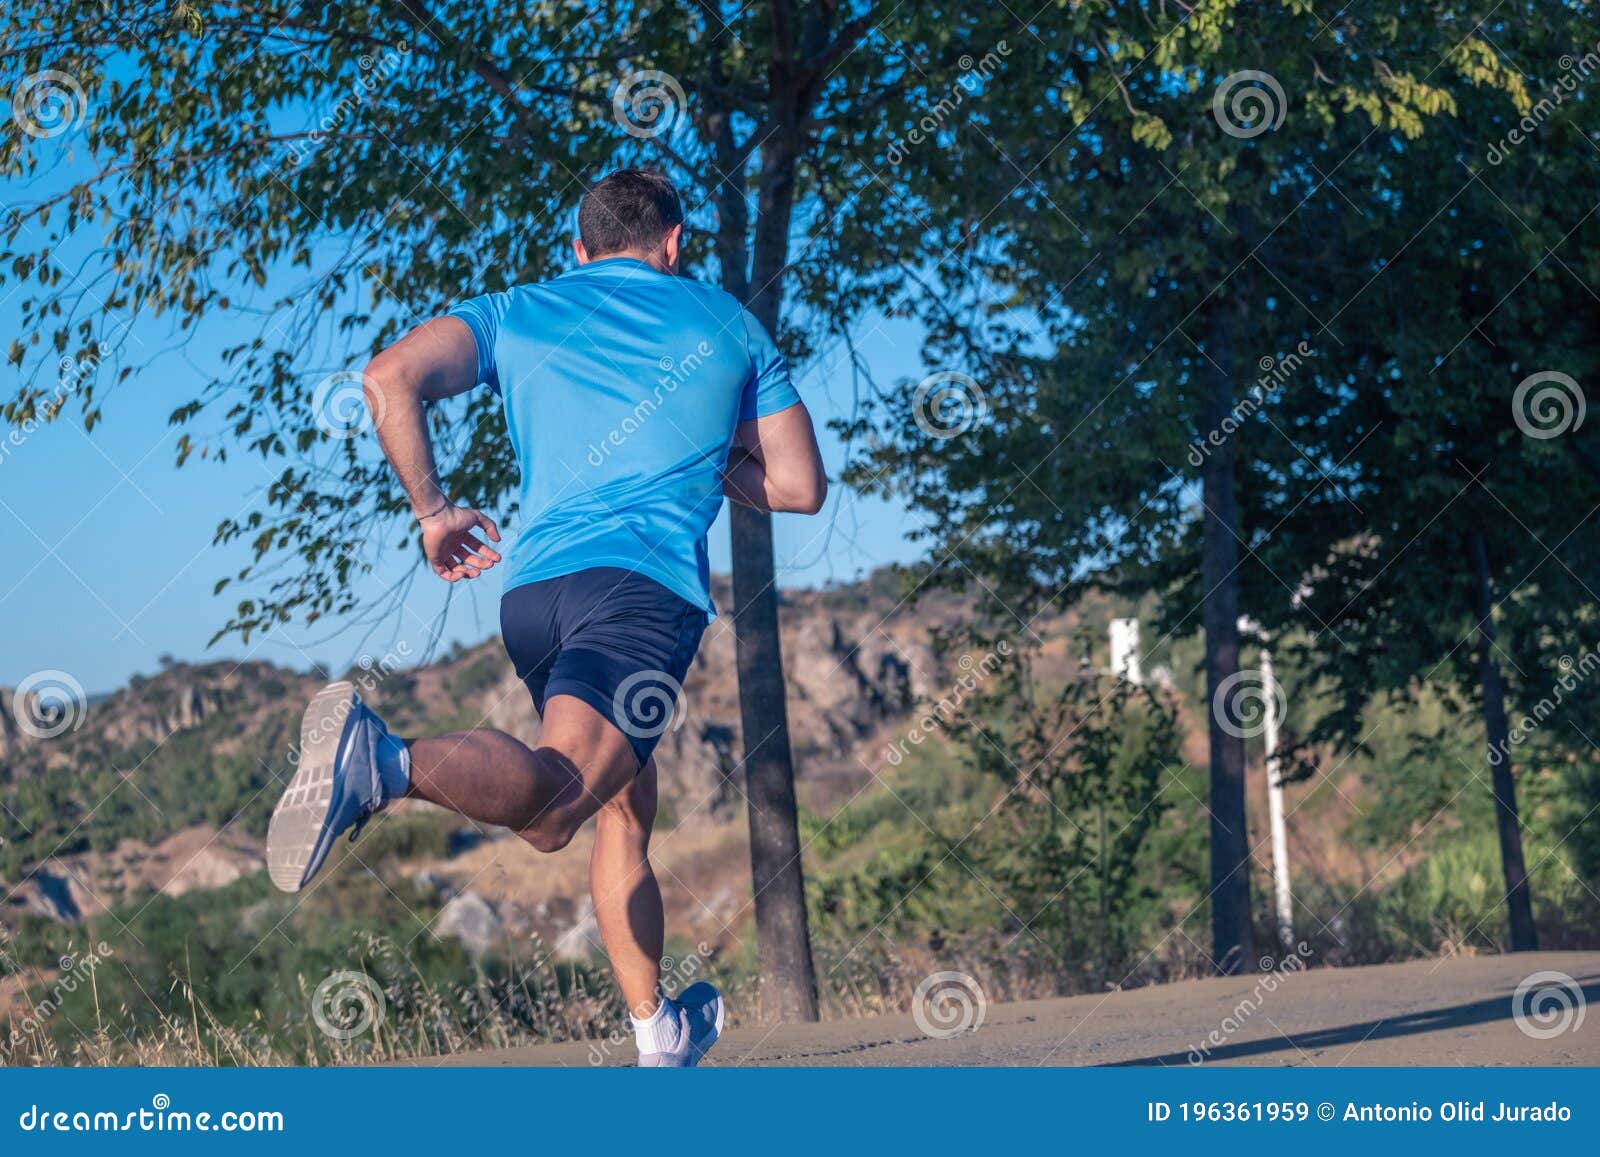 Young Man in Blue T-shirt Running through a Park Stock Image - Image of ...